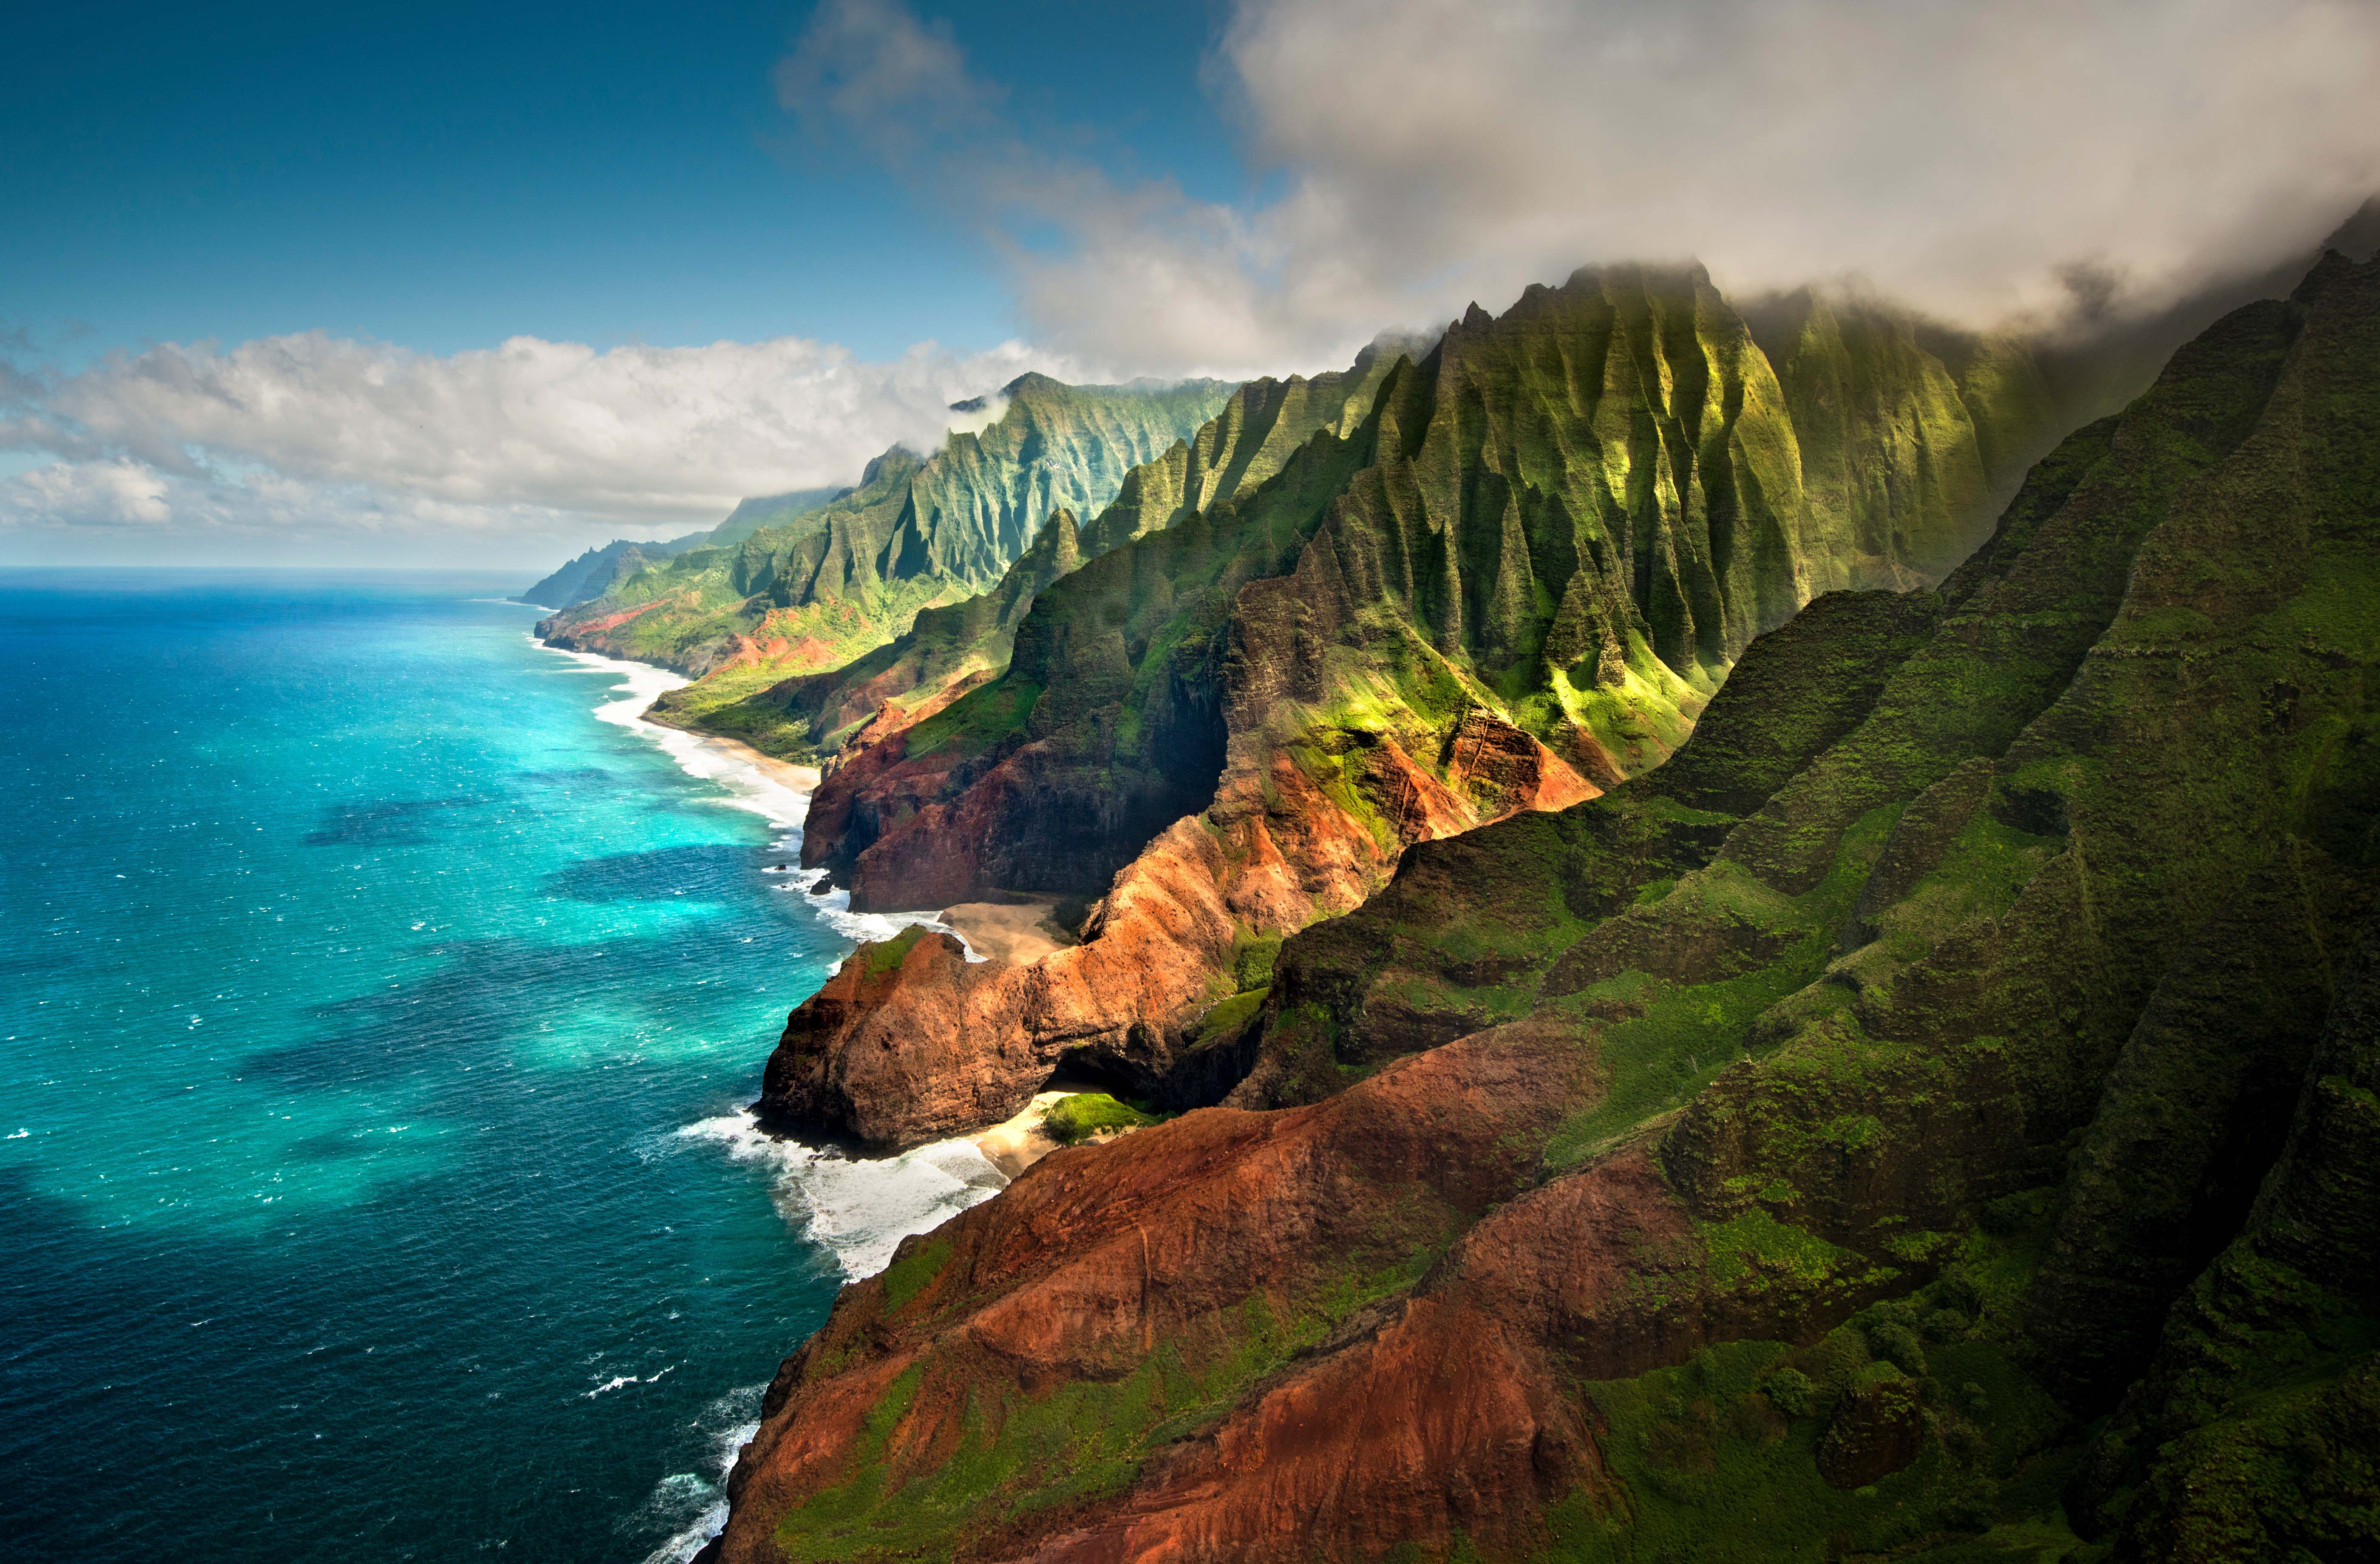 The rugged cliffs of the Na Pali Coast. Image by Cultura RM/George Karbus Photography / Getty